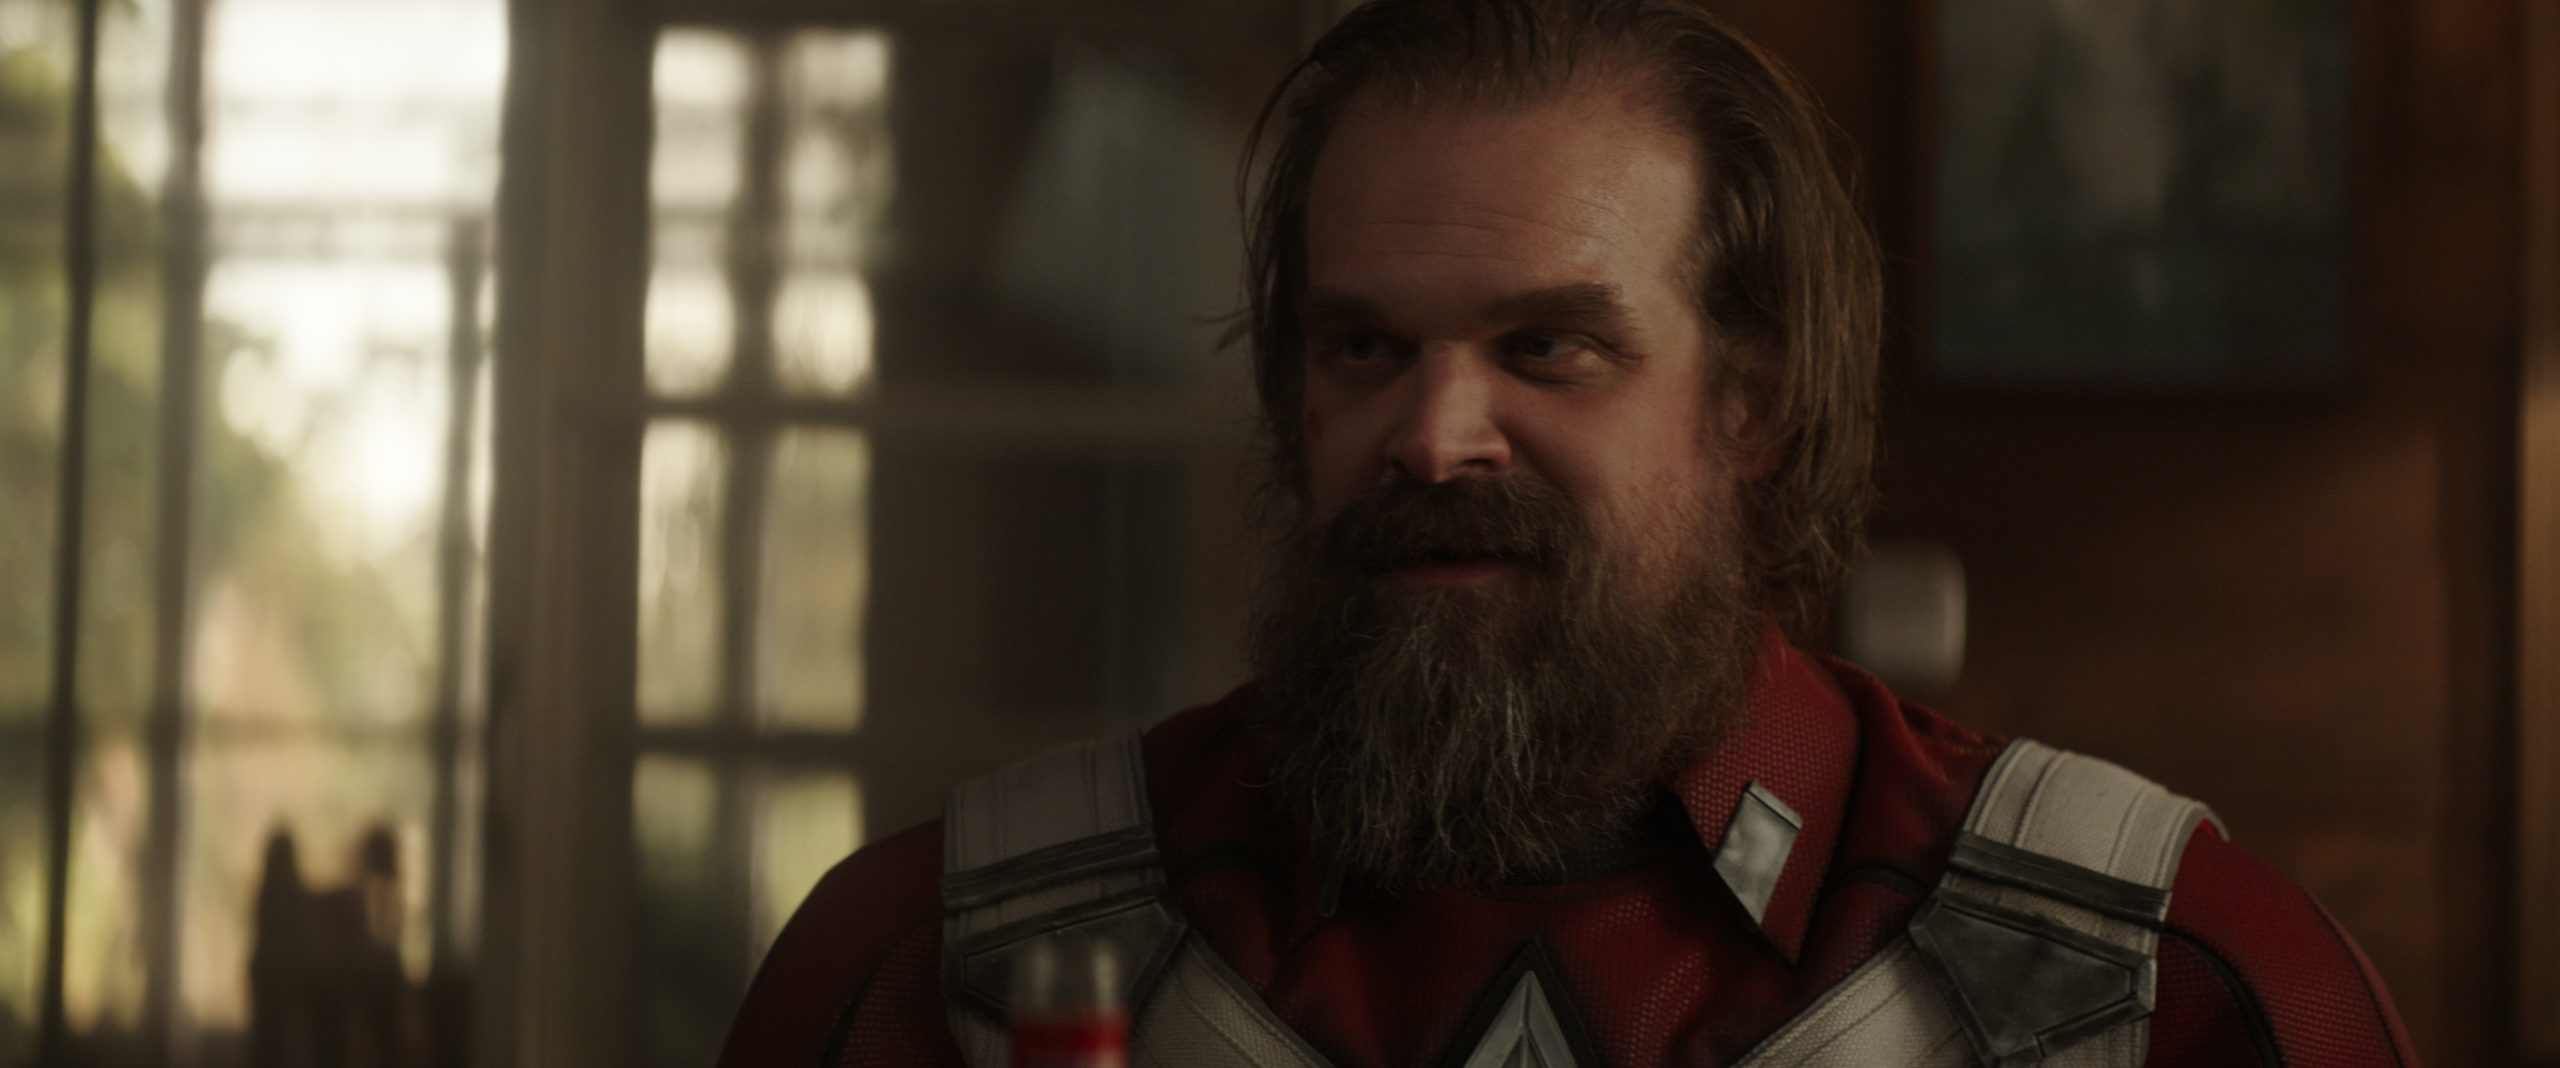 A Captain America/Red Guardian Team Up? Black Widow David Harbour Weighs In | Black Widow